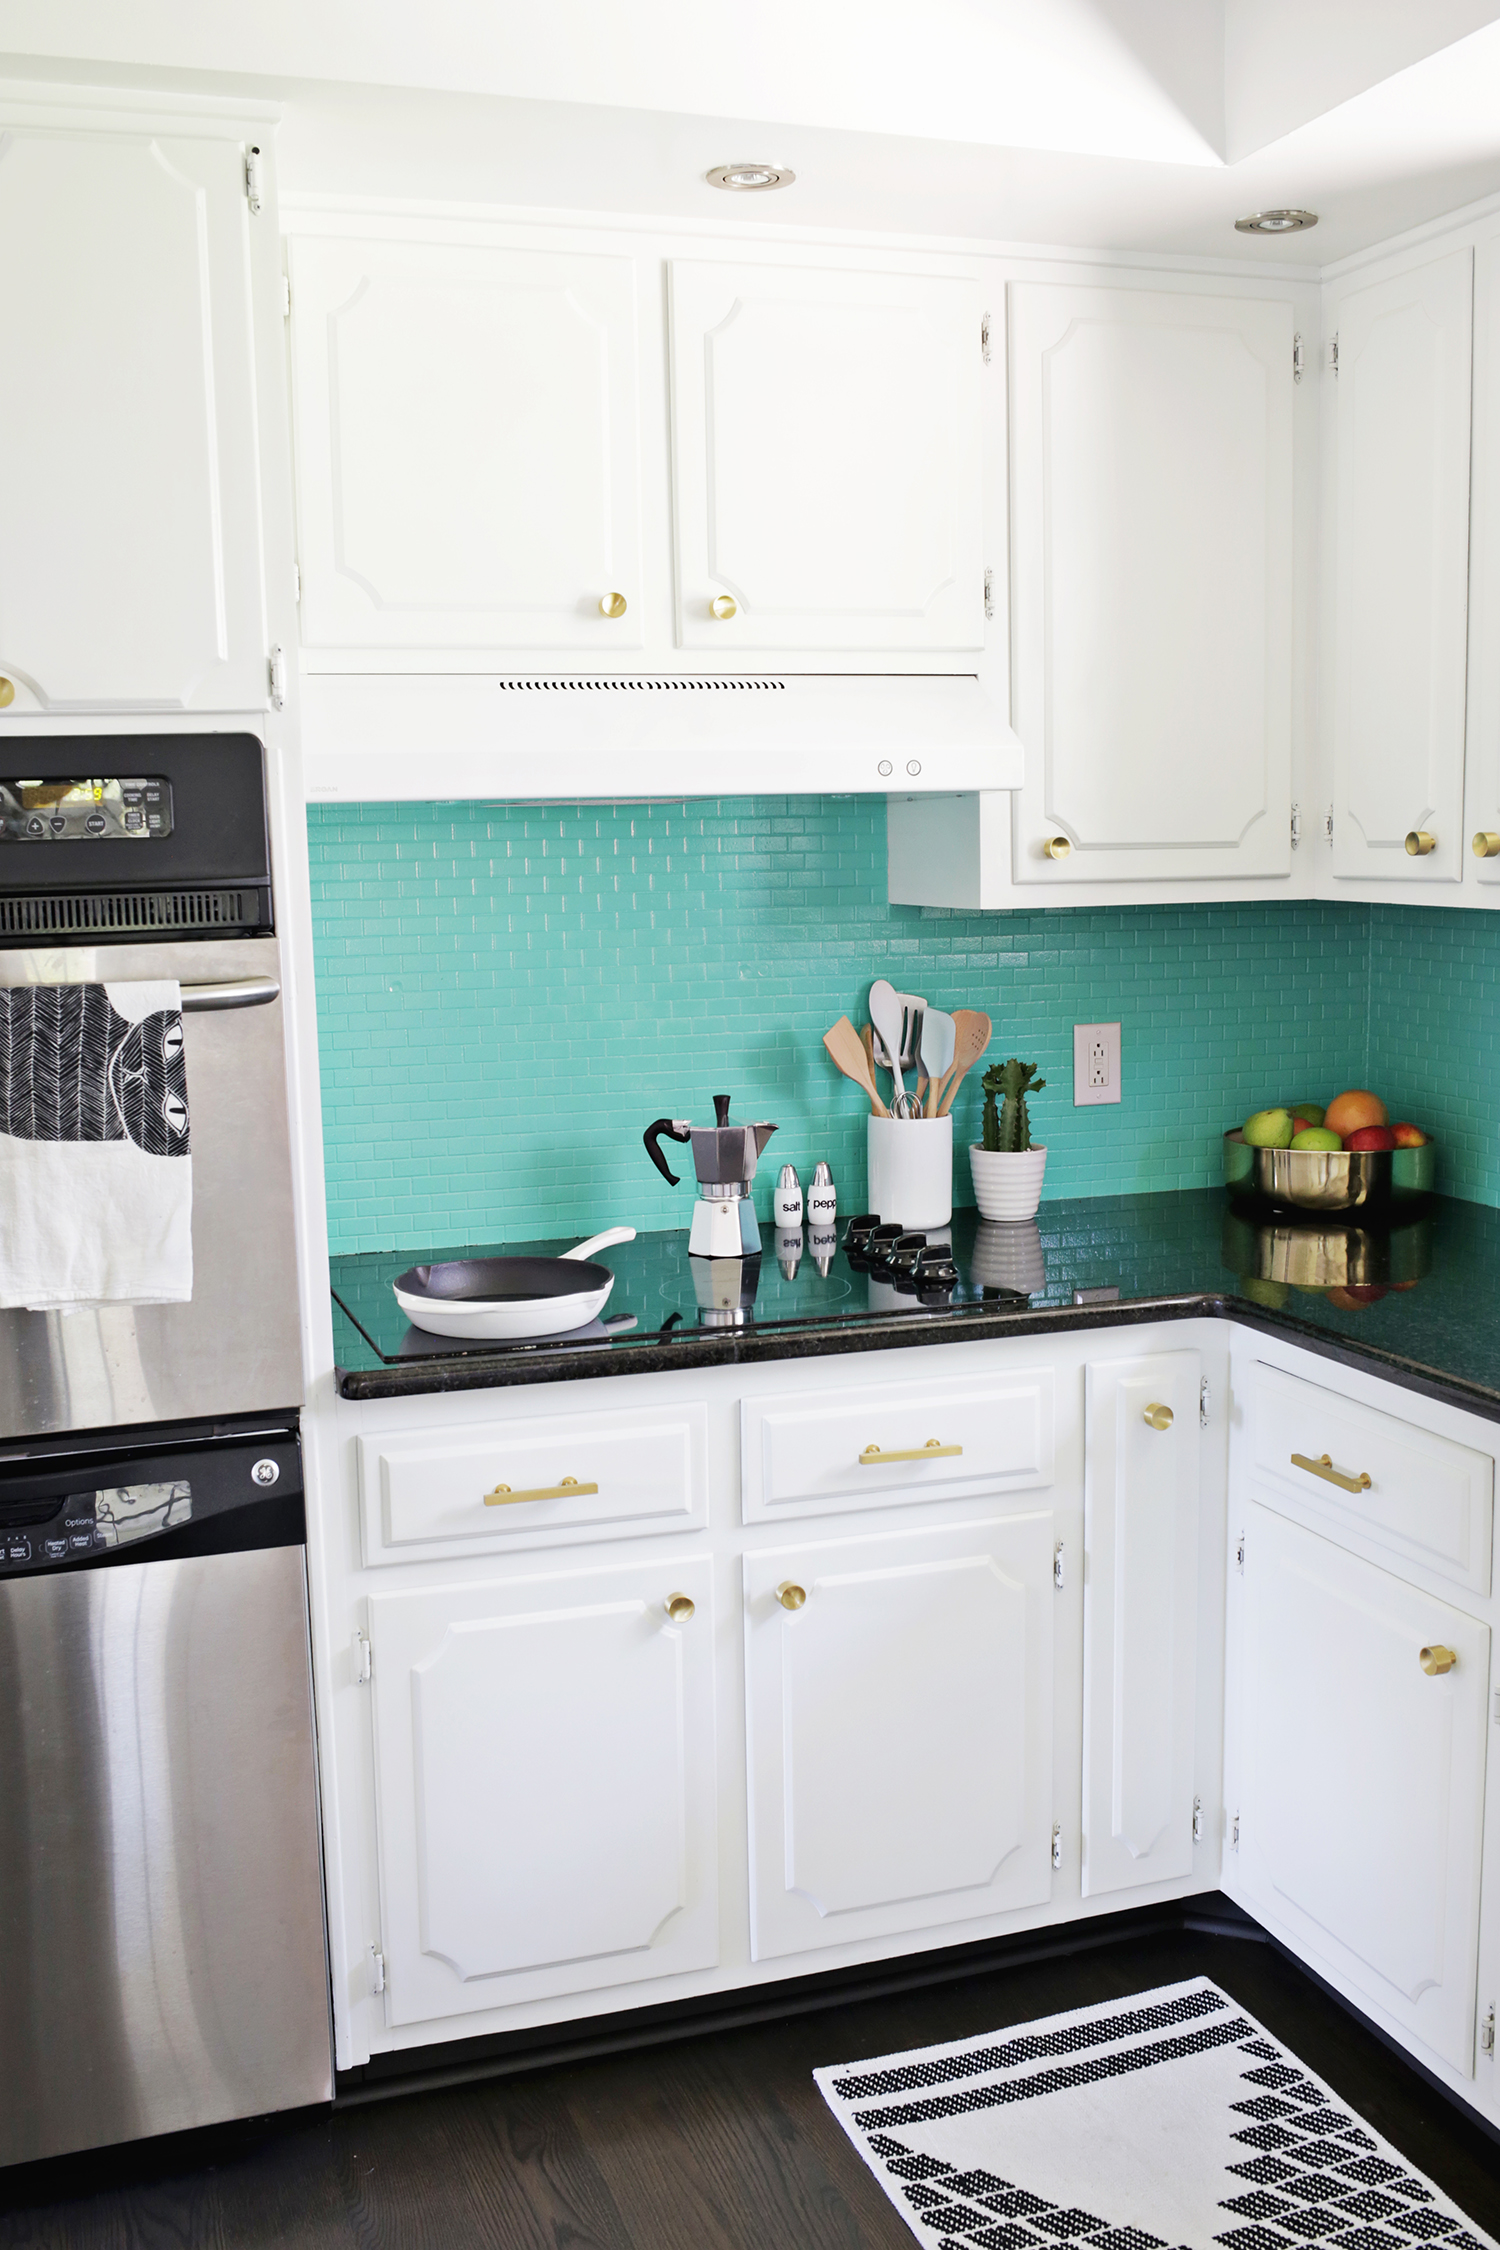 Laura's kitchen before and after (click through to see more!) 